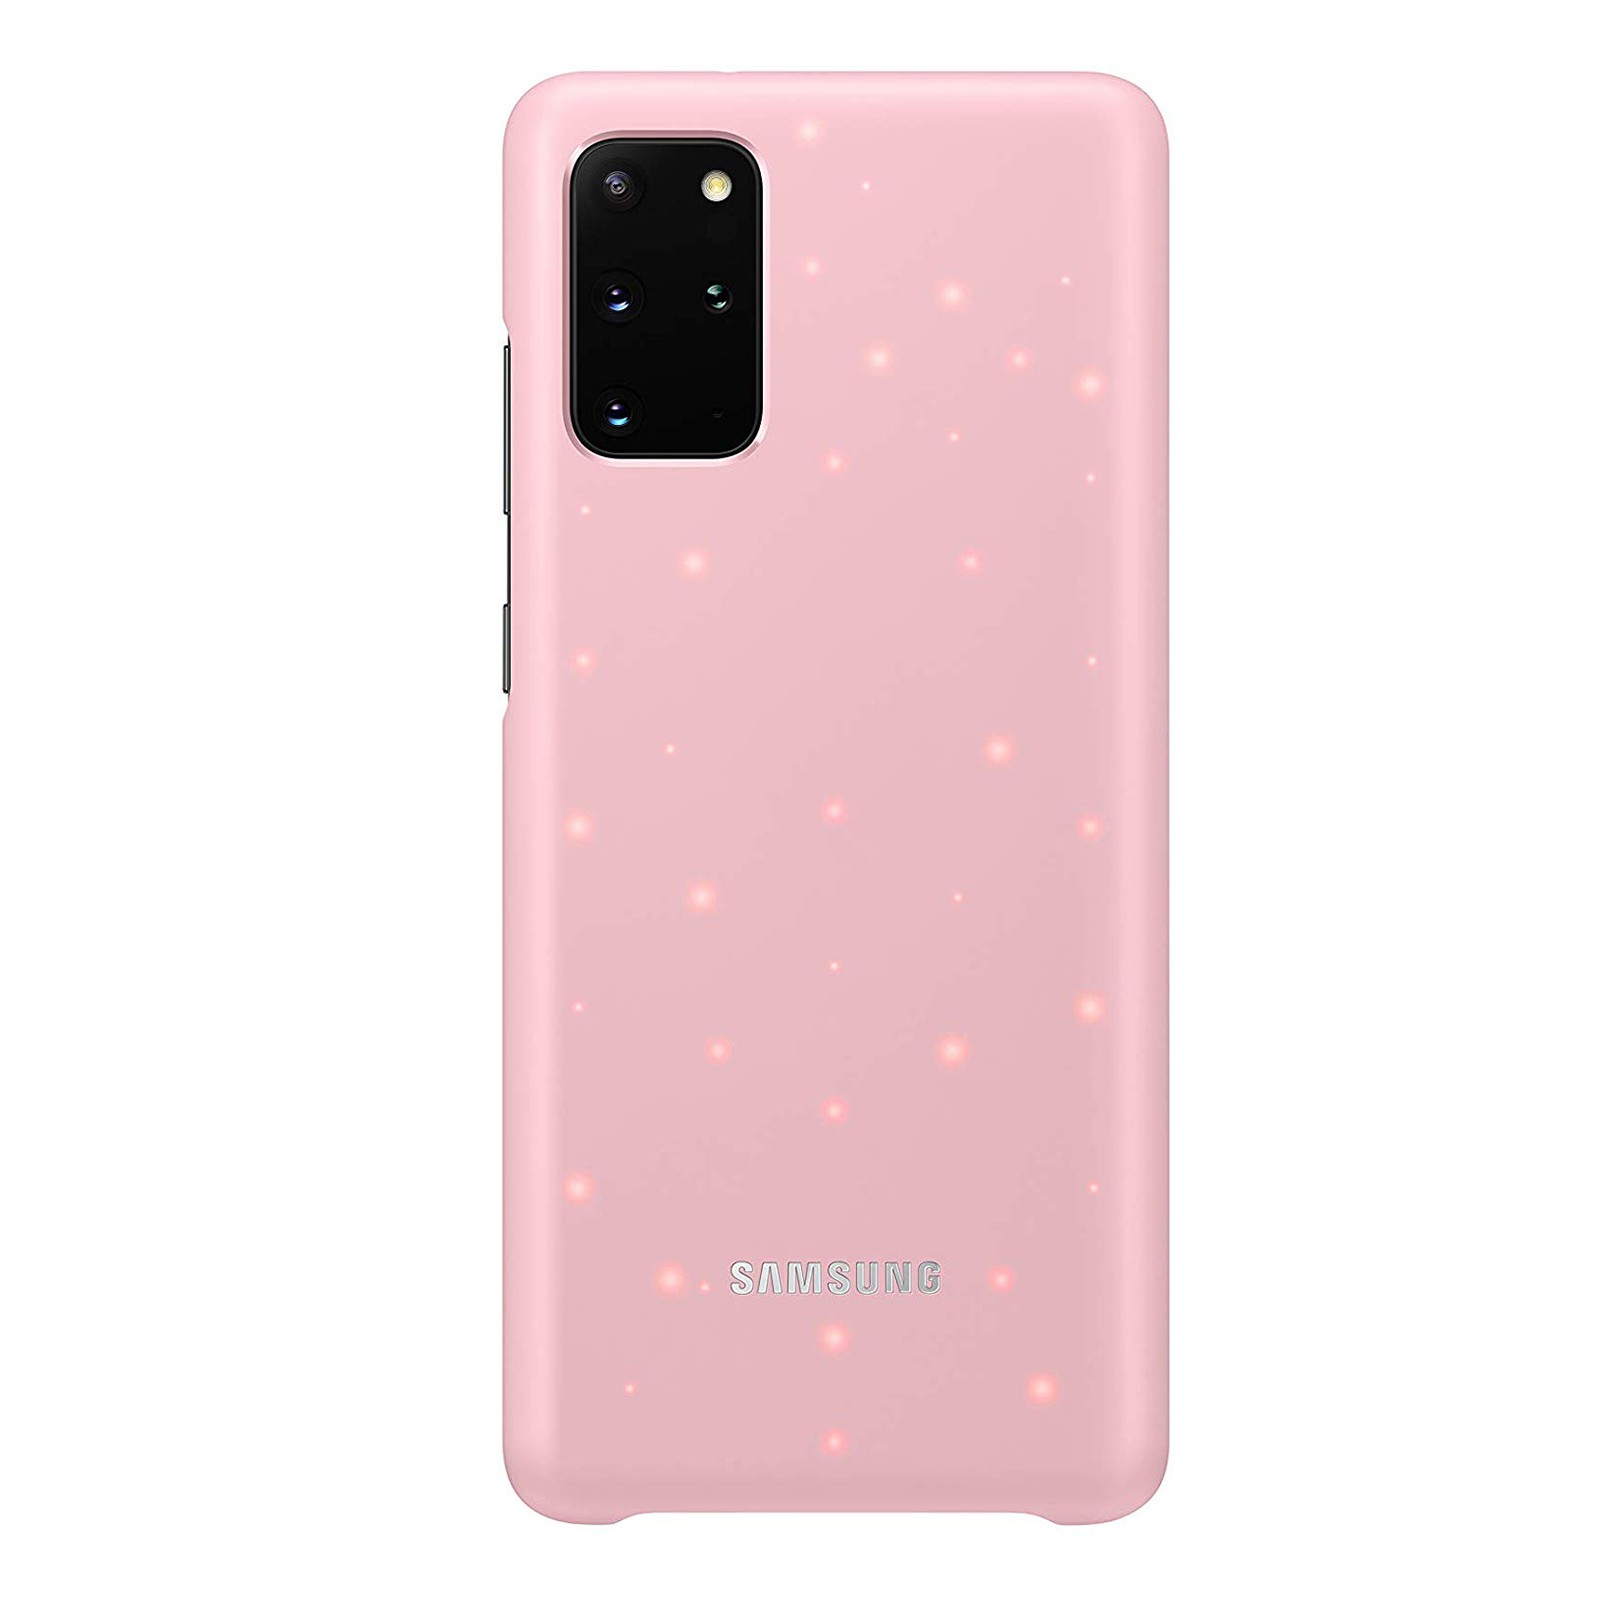 SAMSUNG EF-KG985 LED COVER Pink Galaxy GALAXY PINK, Samsung, S20+, Backcover, S20